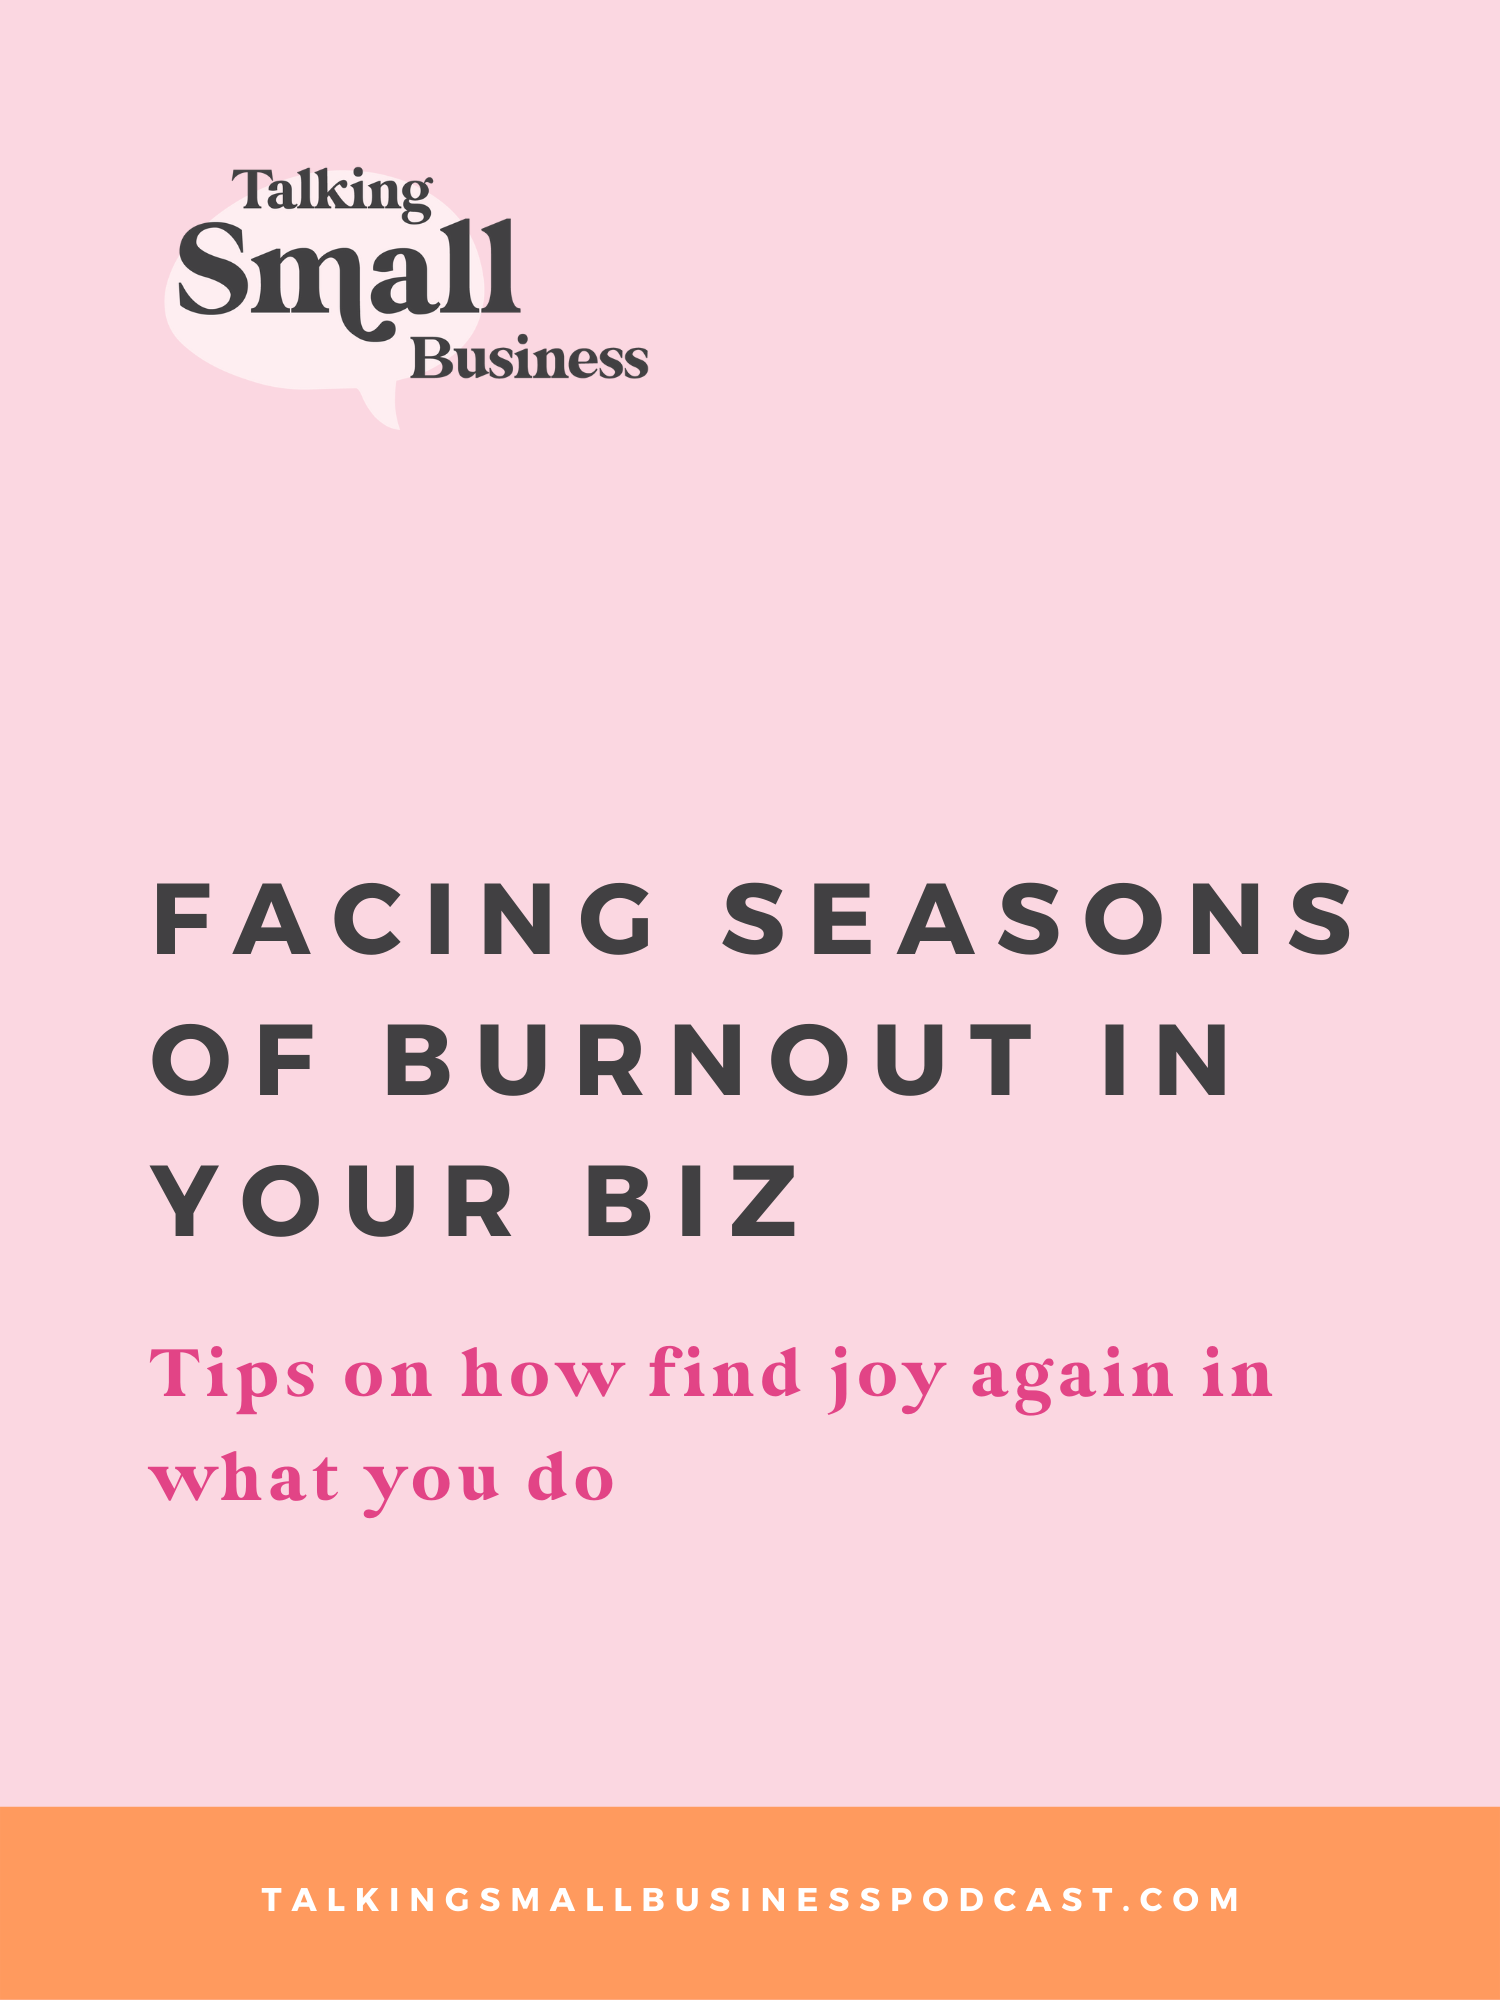 Facing burnout in business and how to find joy again in what you do: tips shared by Kat Schmoyer and Megan Martin on Talking Small Business